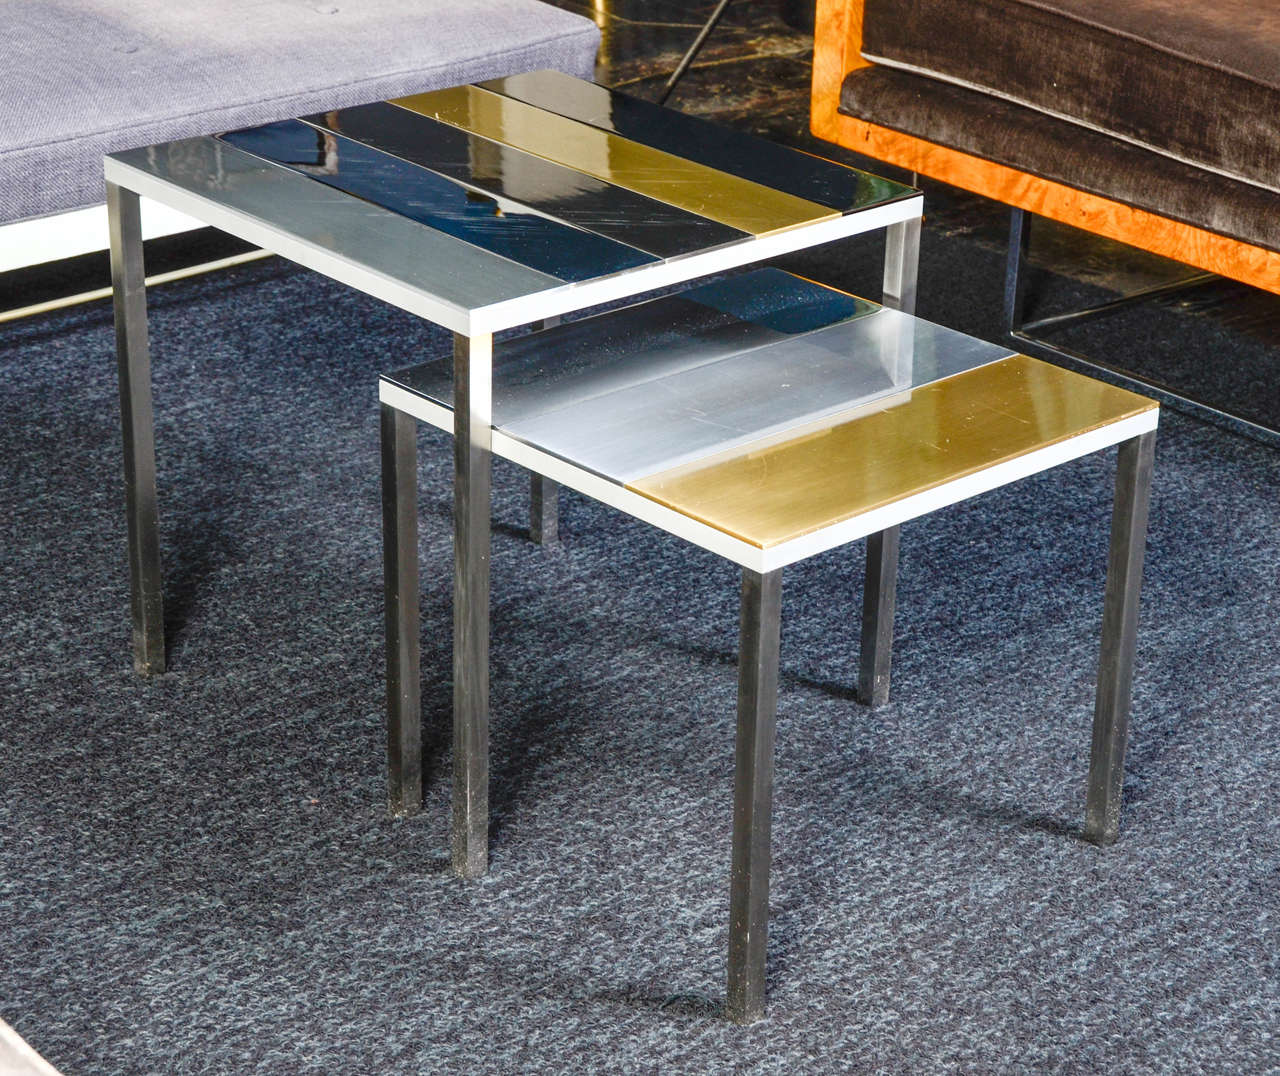 Unique pair of nested tables from the Florence Lopez collection by artist Thomas Lemut
Stainless steel, brass and aluminium.
Unique piece.
Very elegant and pure lines.

Large table dimension: 38cm x 38cm x 43cm.
Small table dimension: 43cm x